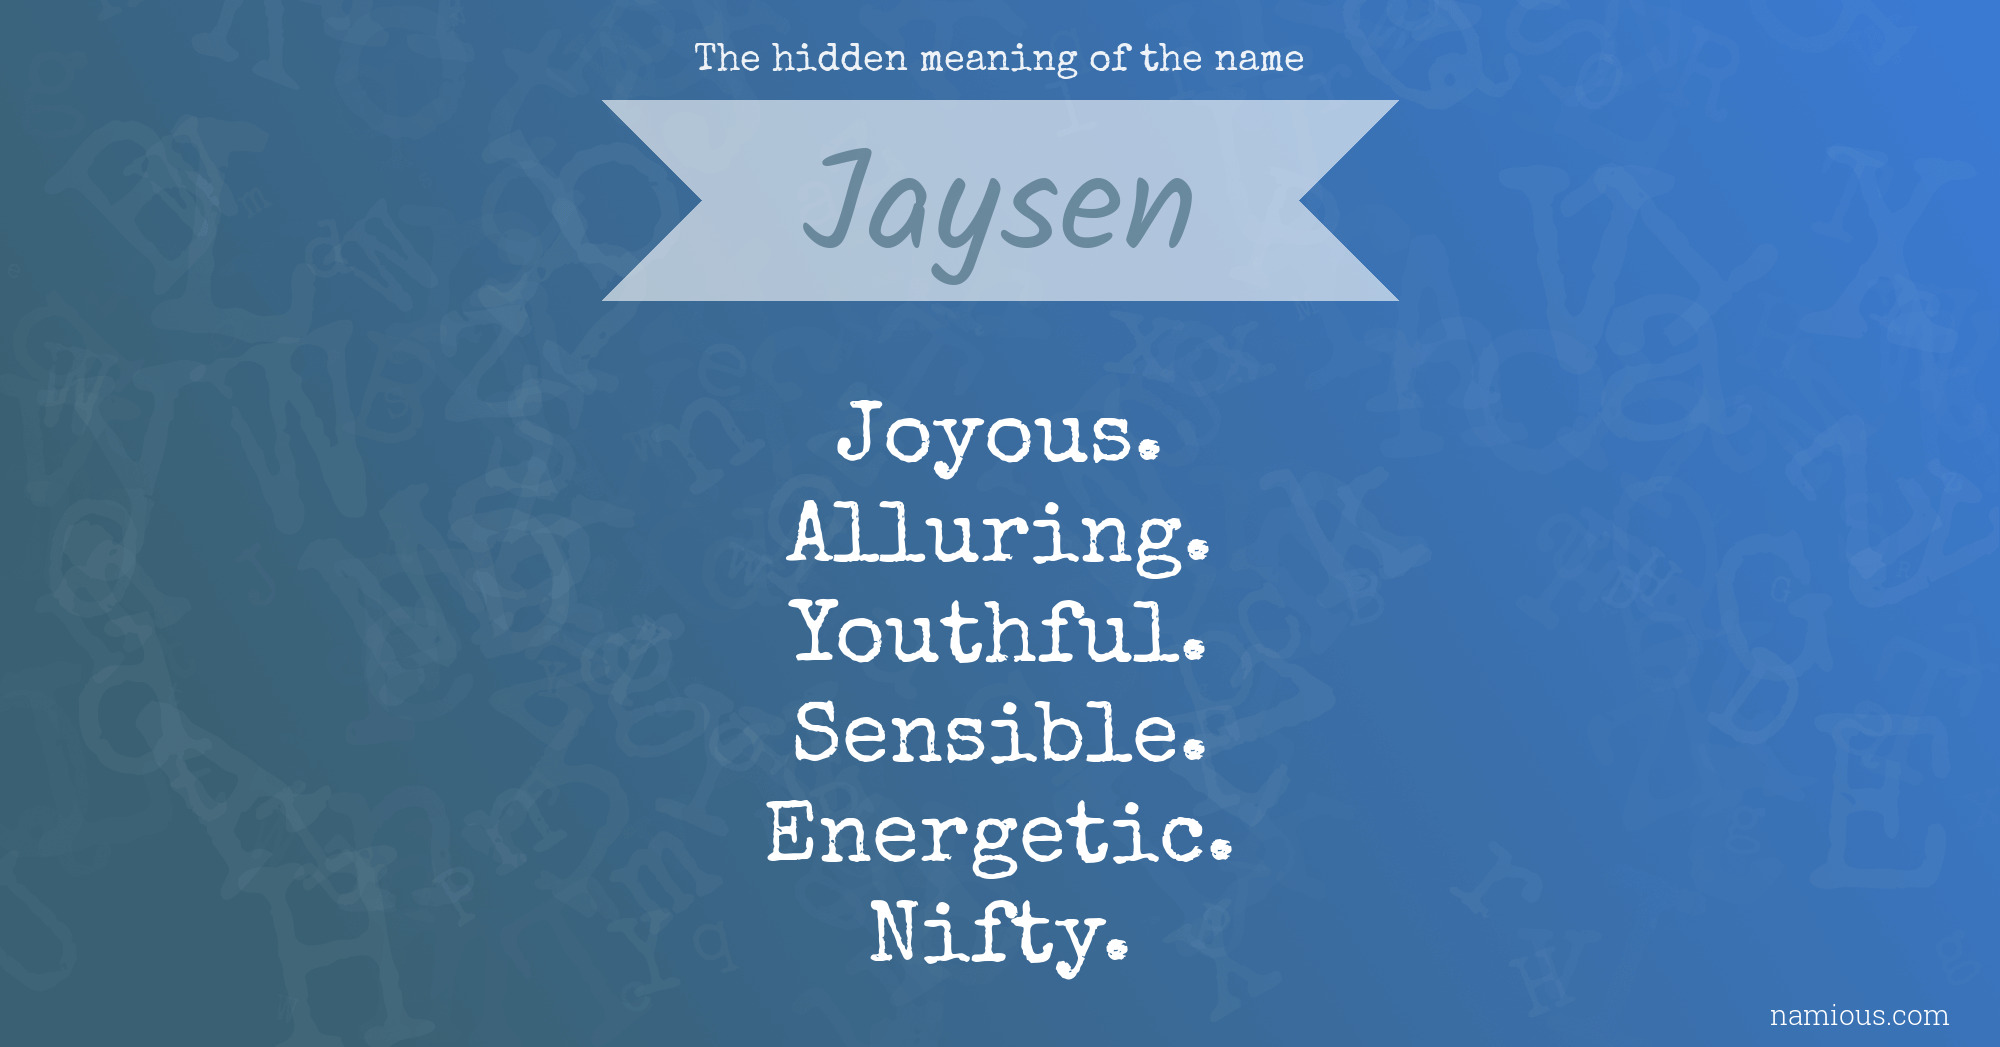 The hidden meaning of the name Jaysen